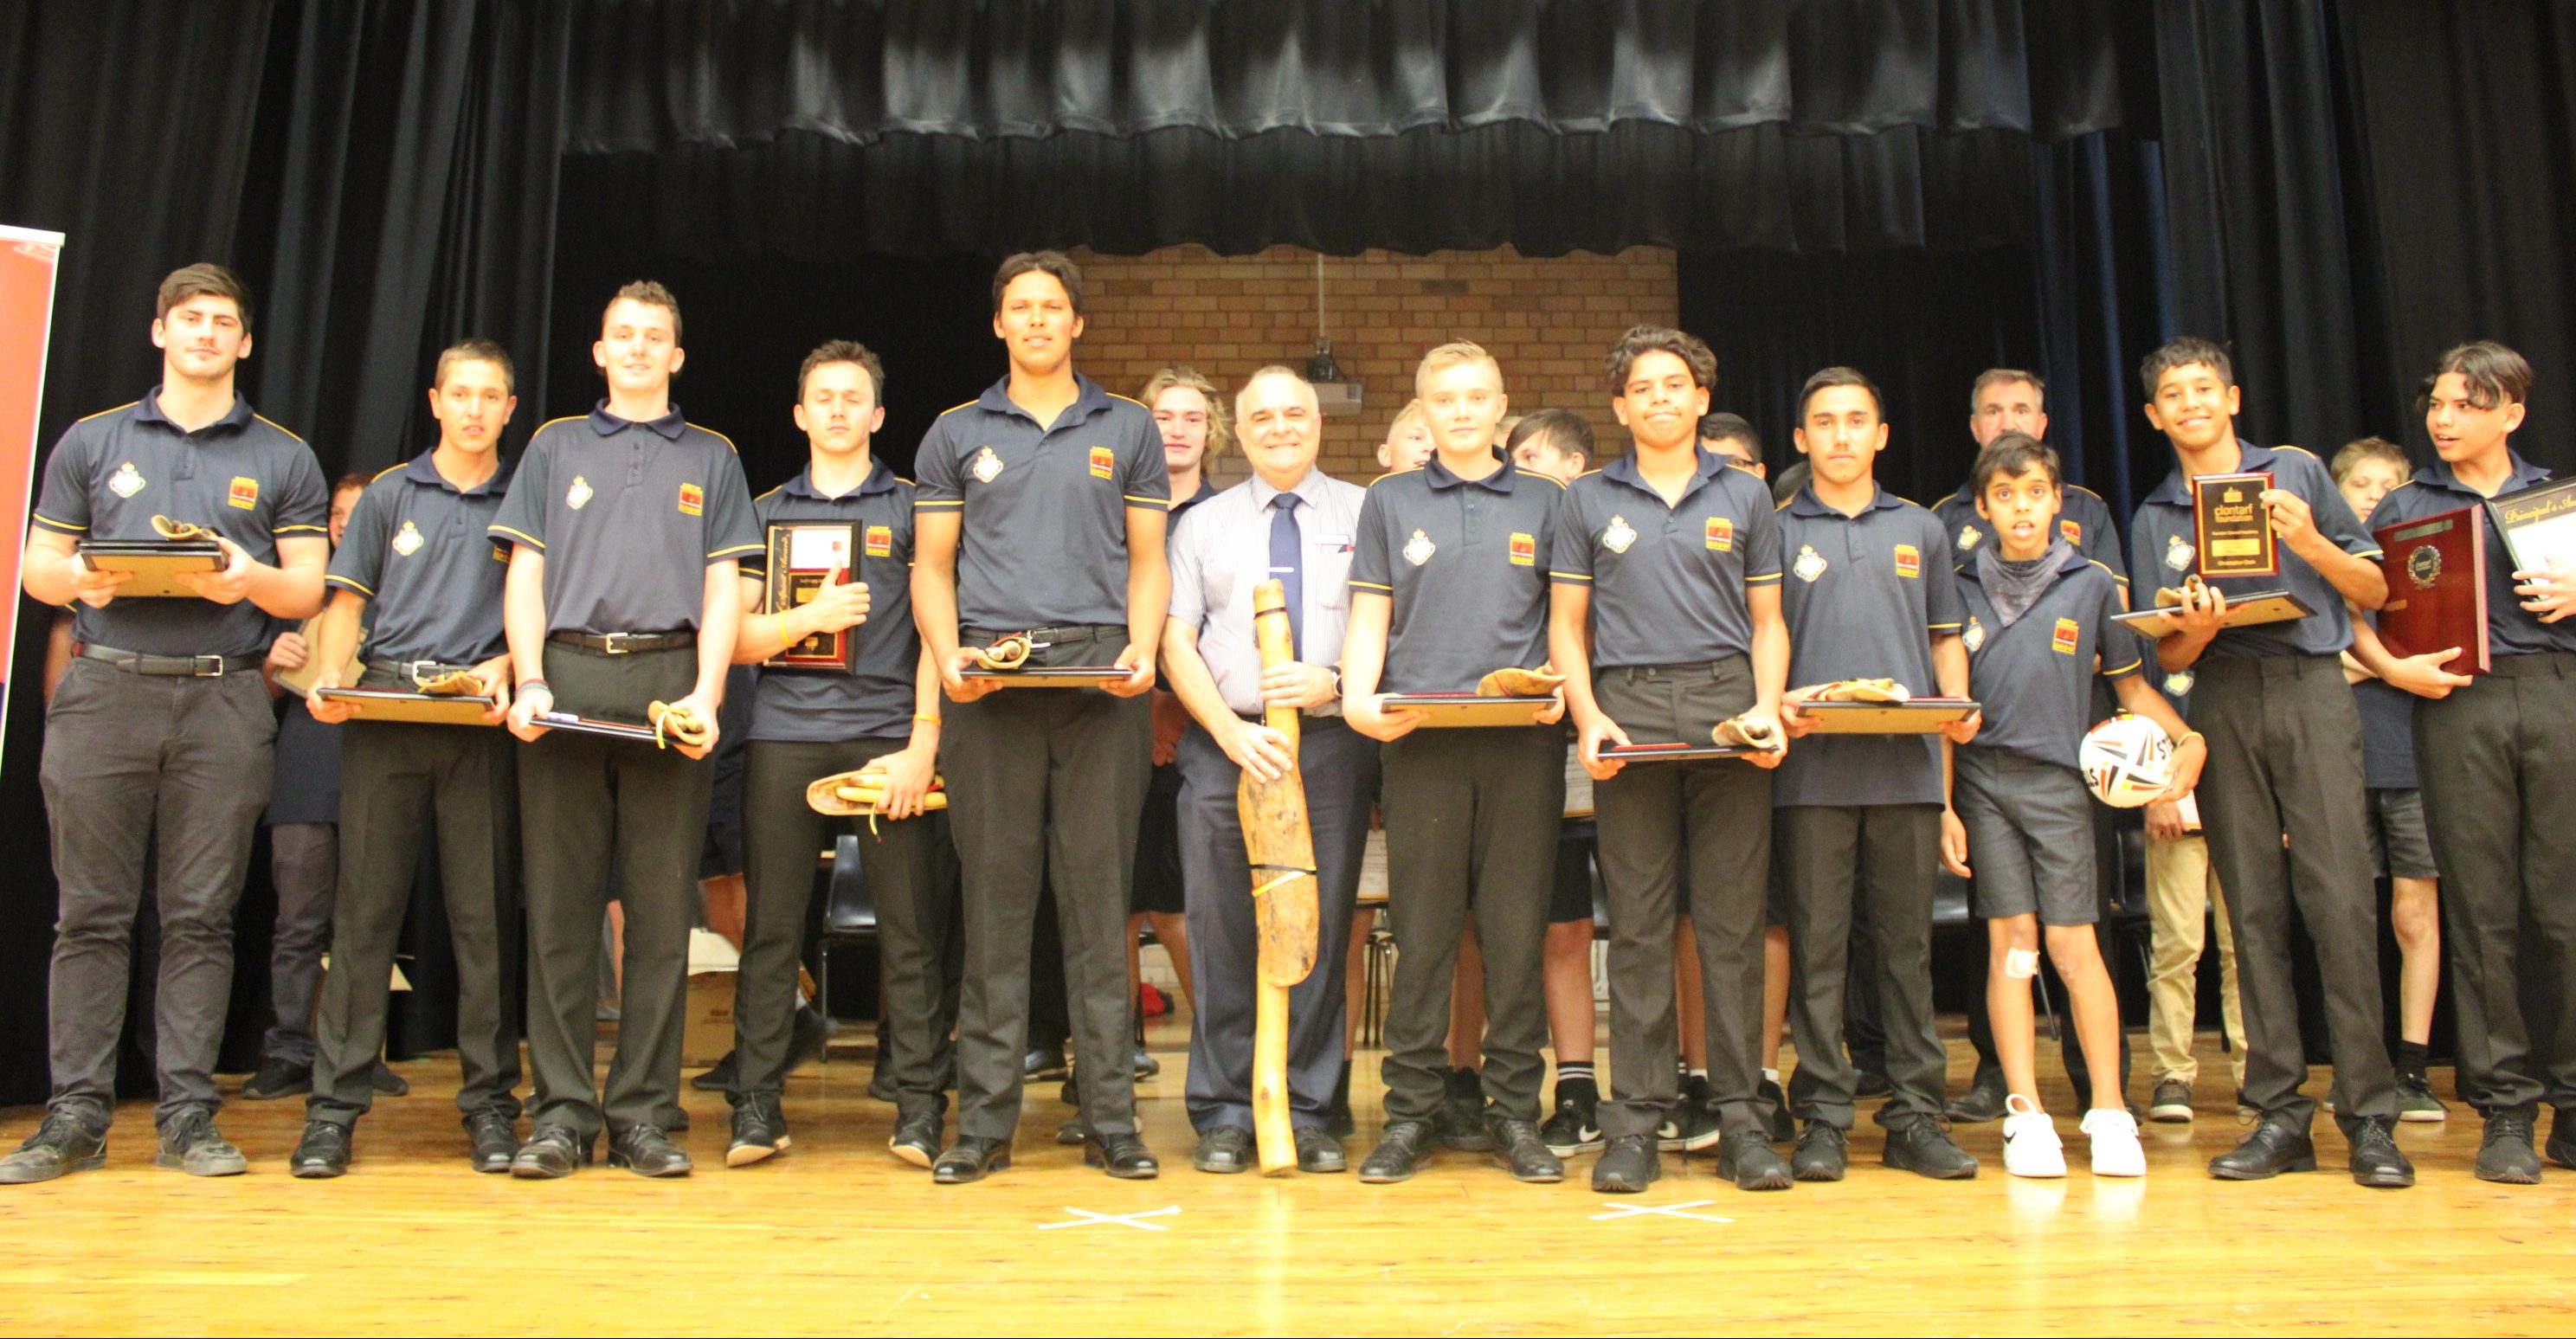 Clontarf students rewarded for great year